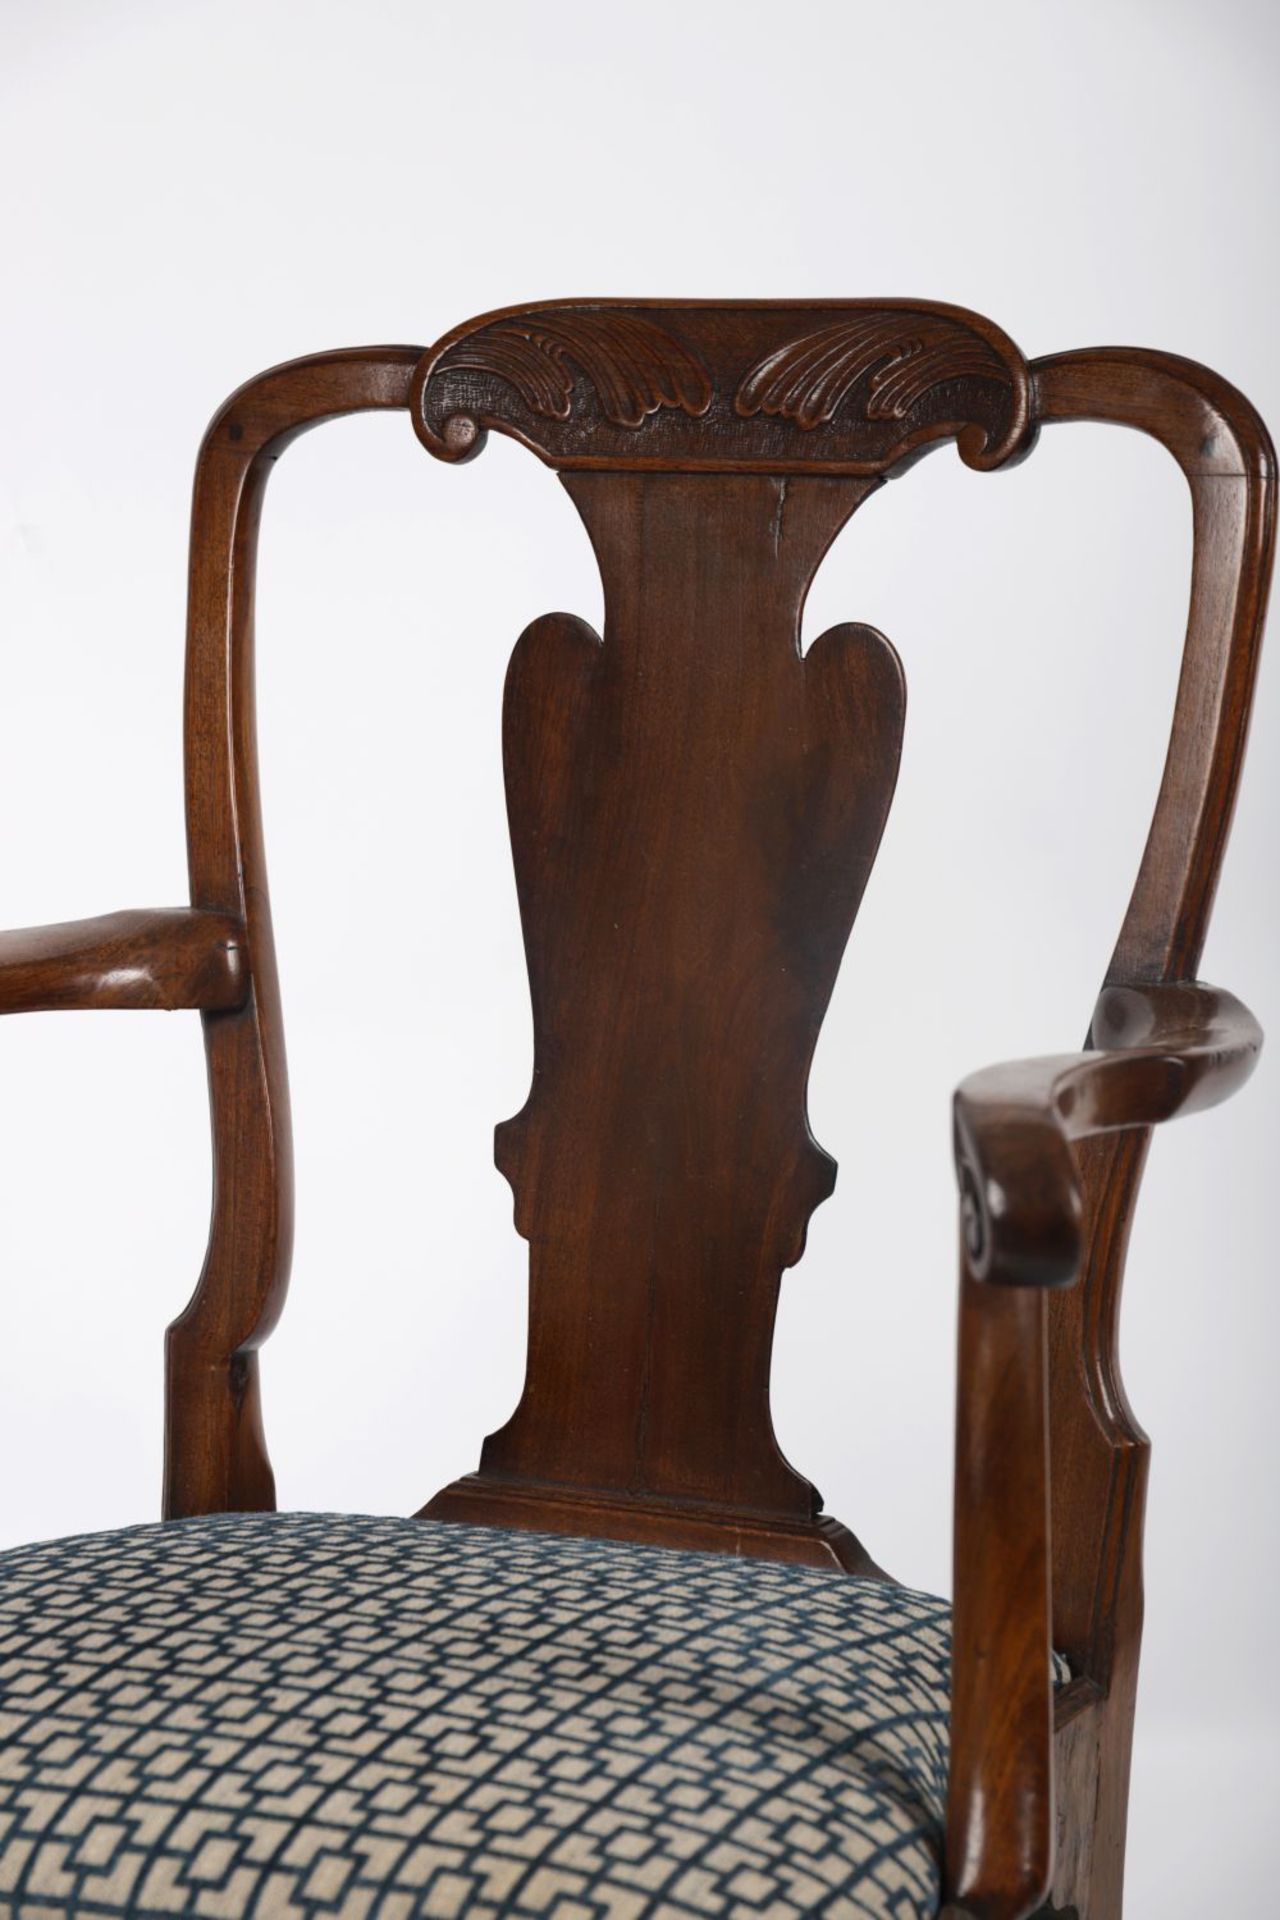 EARLY 18TH-CENTURY MAHOGANY ELBOW CHAIR - Image 2 of 3